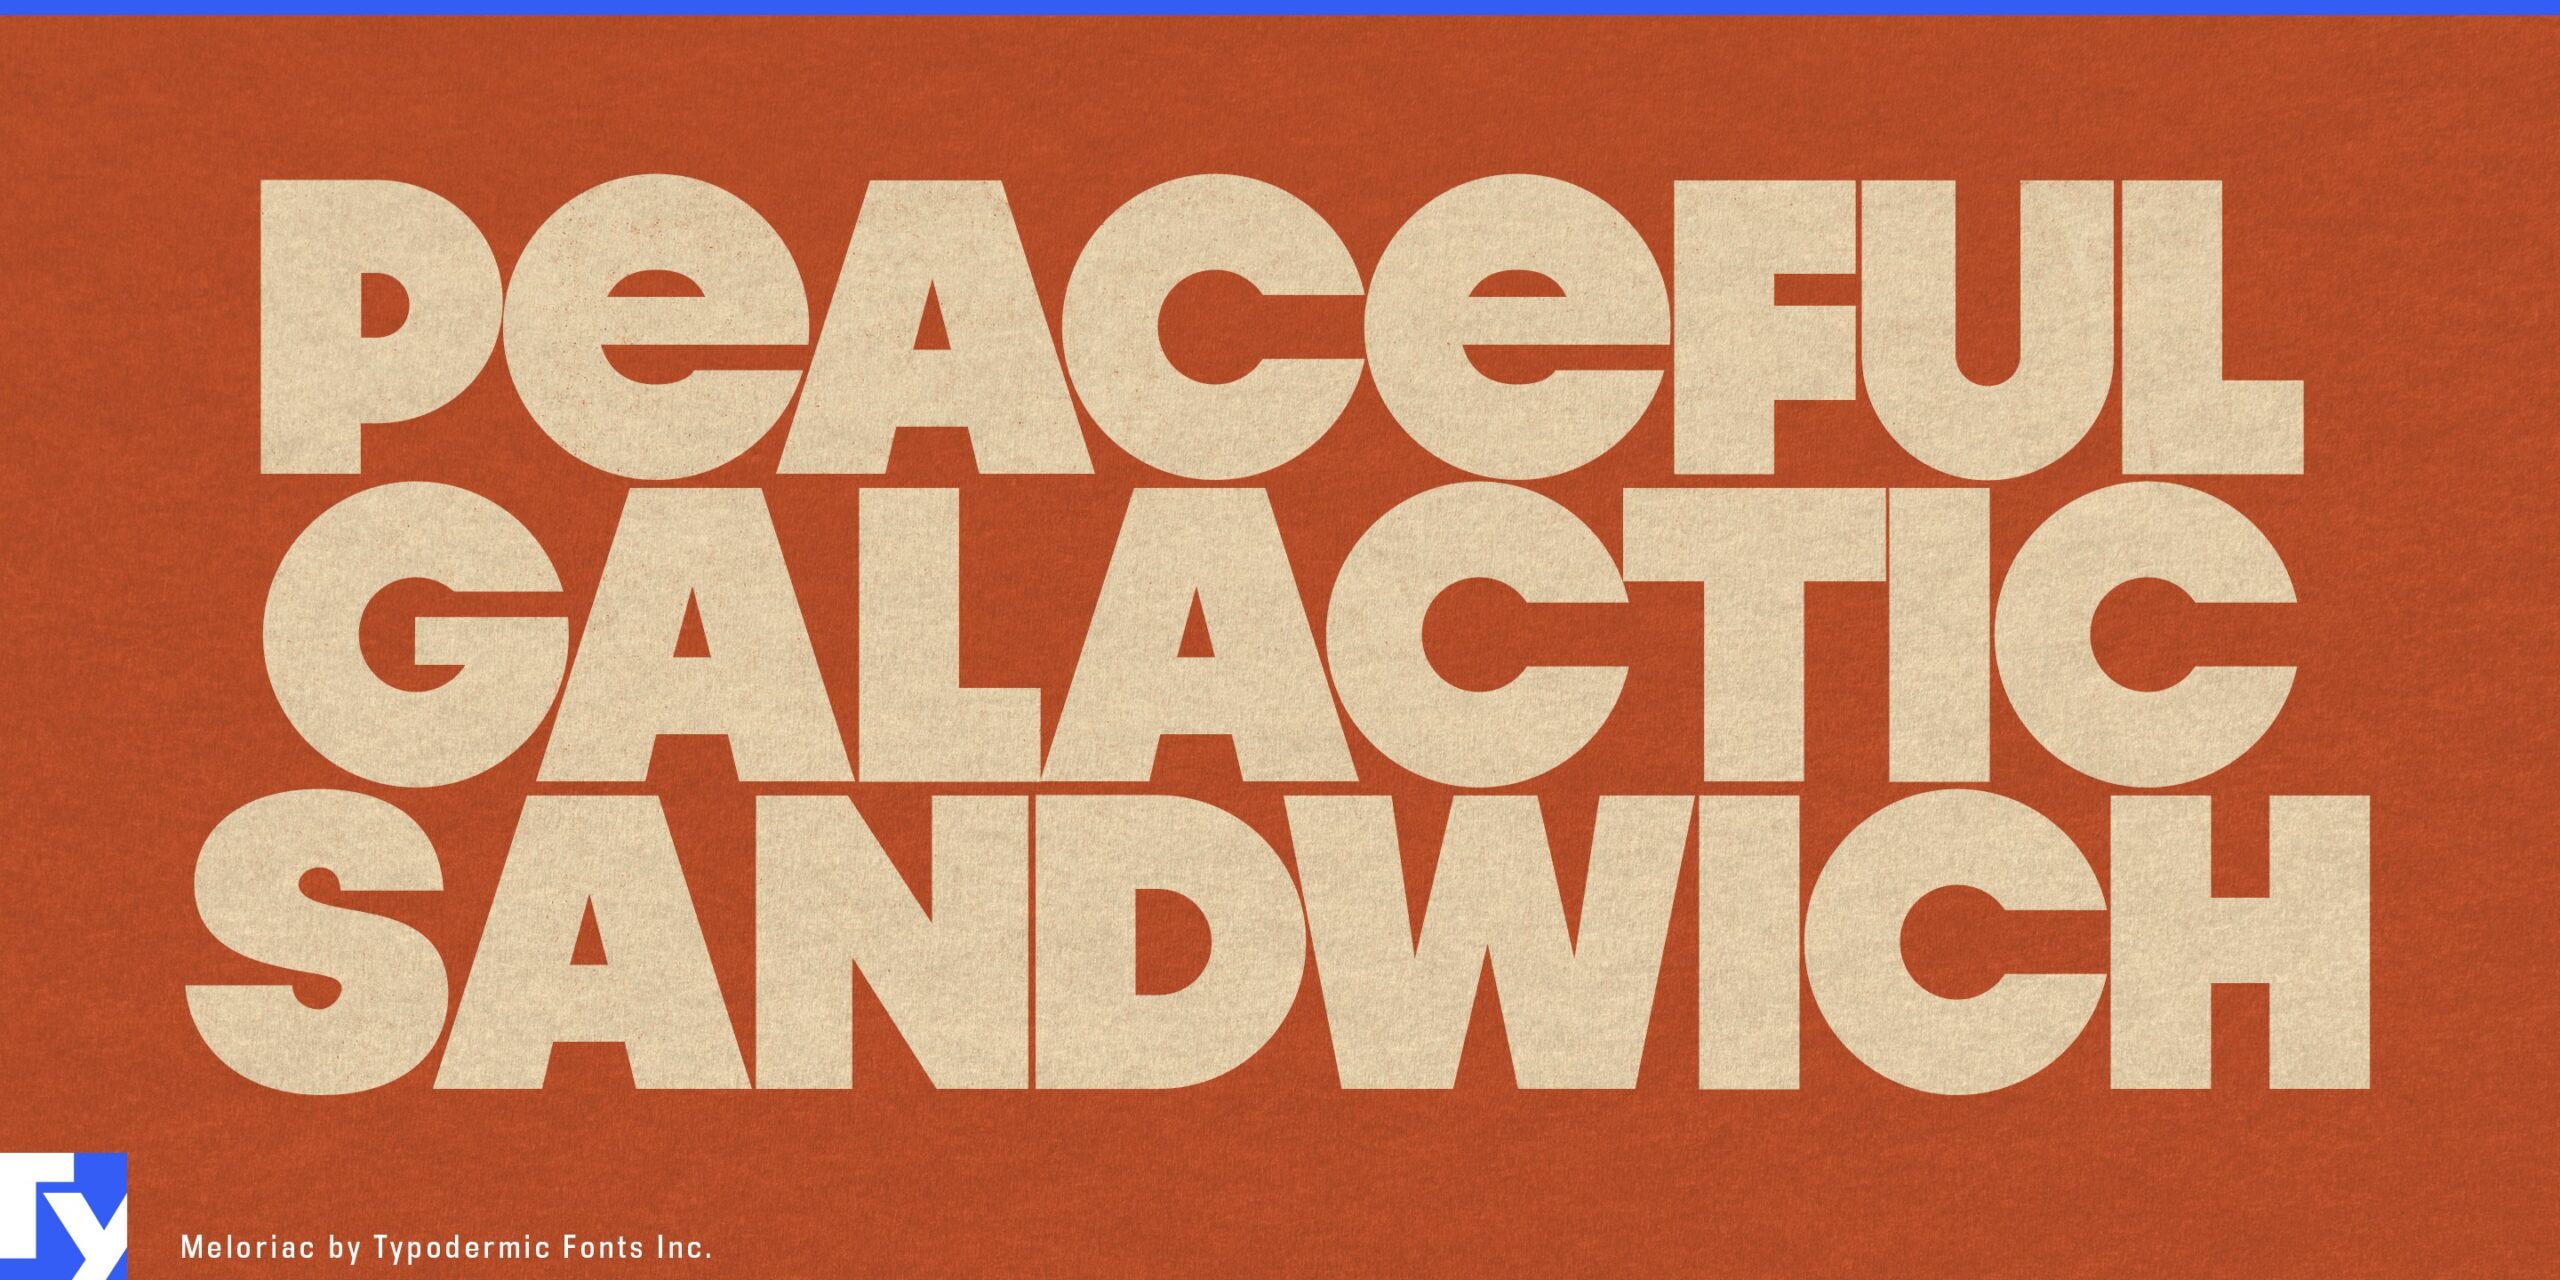 Meloriac Typeface: A Reliable Staple for Today's Designers